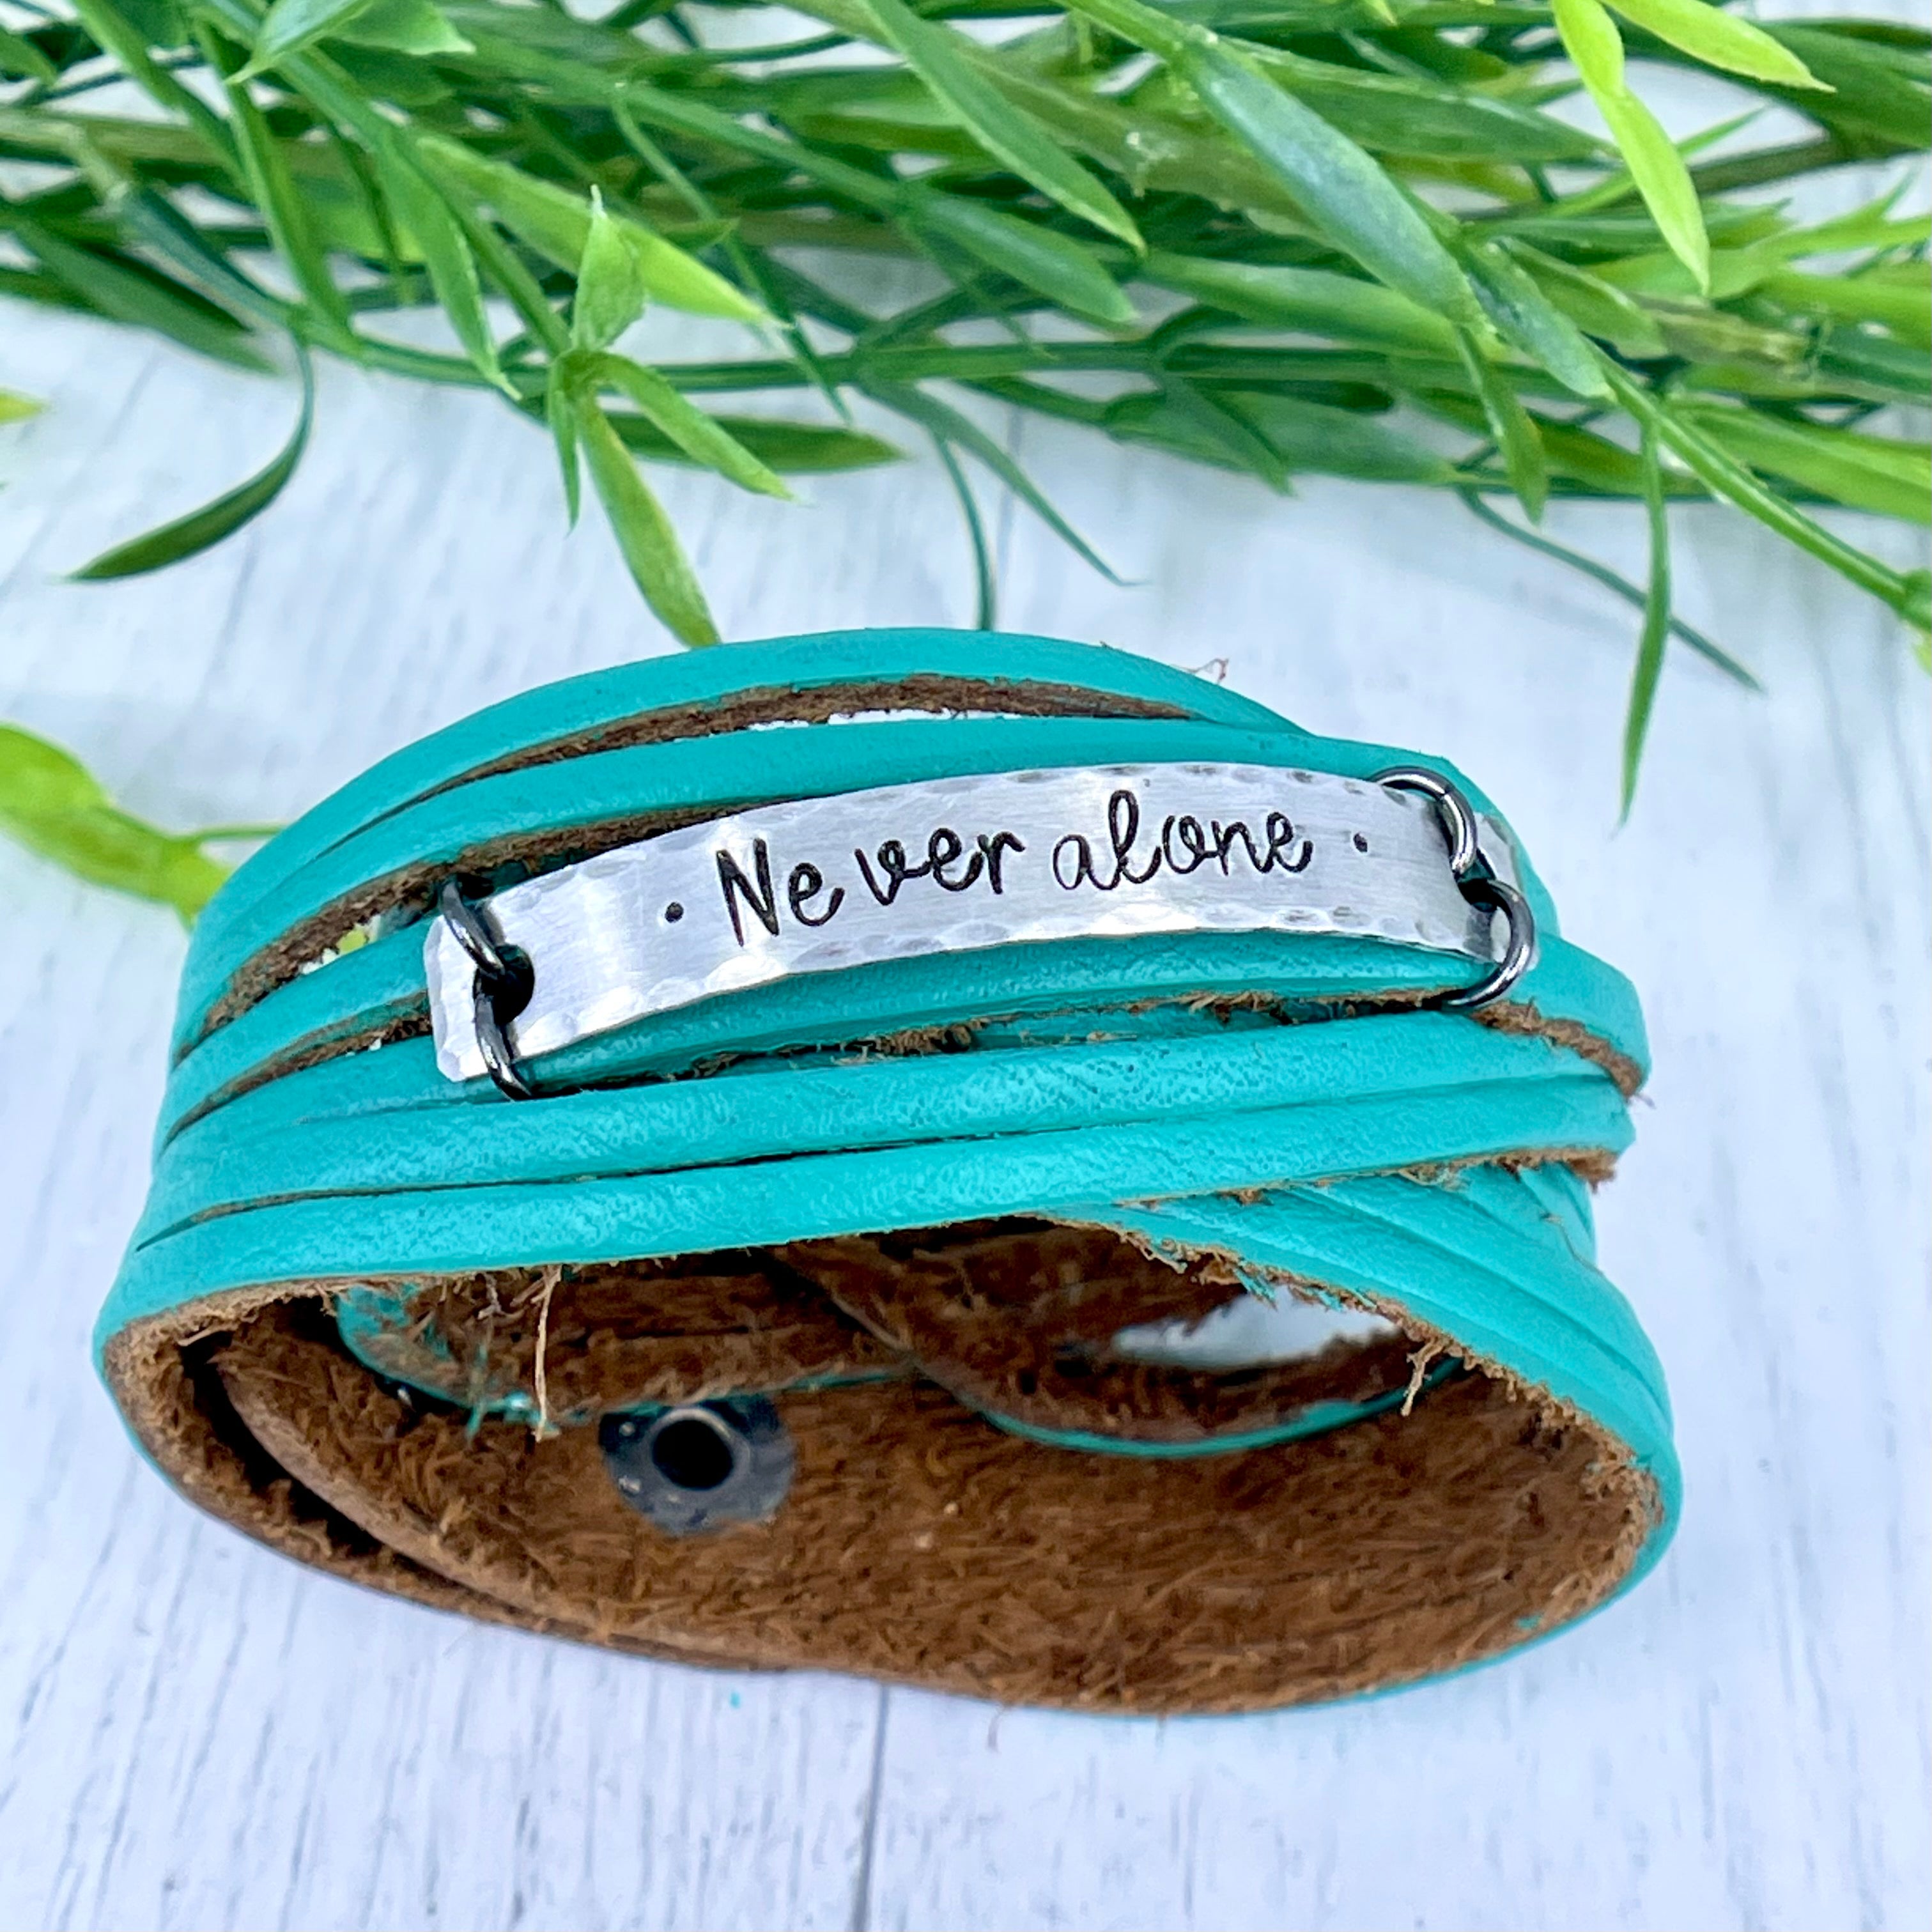 NEVER ALONE Teal Shredded Leather Double Wraps Bracelet, adjustable Leather Wrap Create Hope Cuffs 